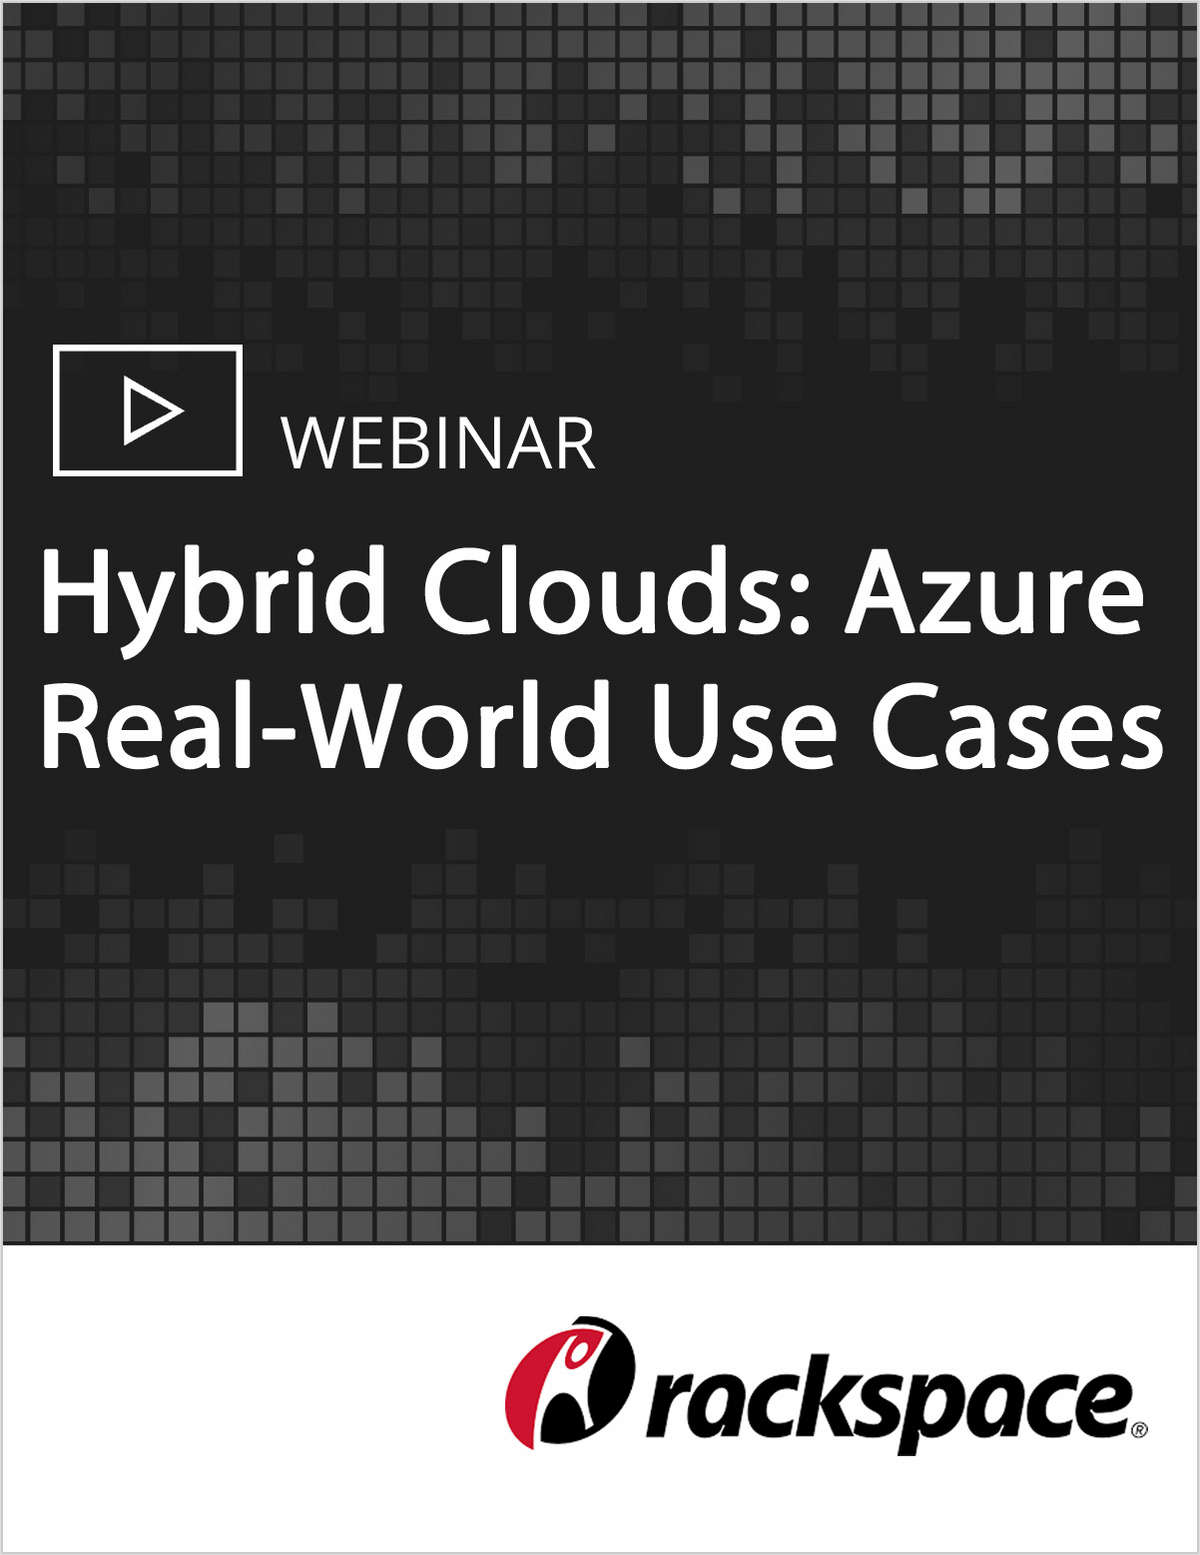 Hybrid Clouds: Azure Real-World Use Cases